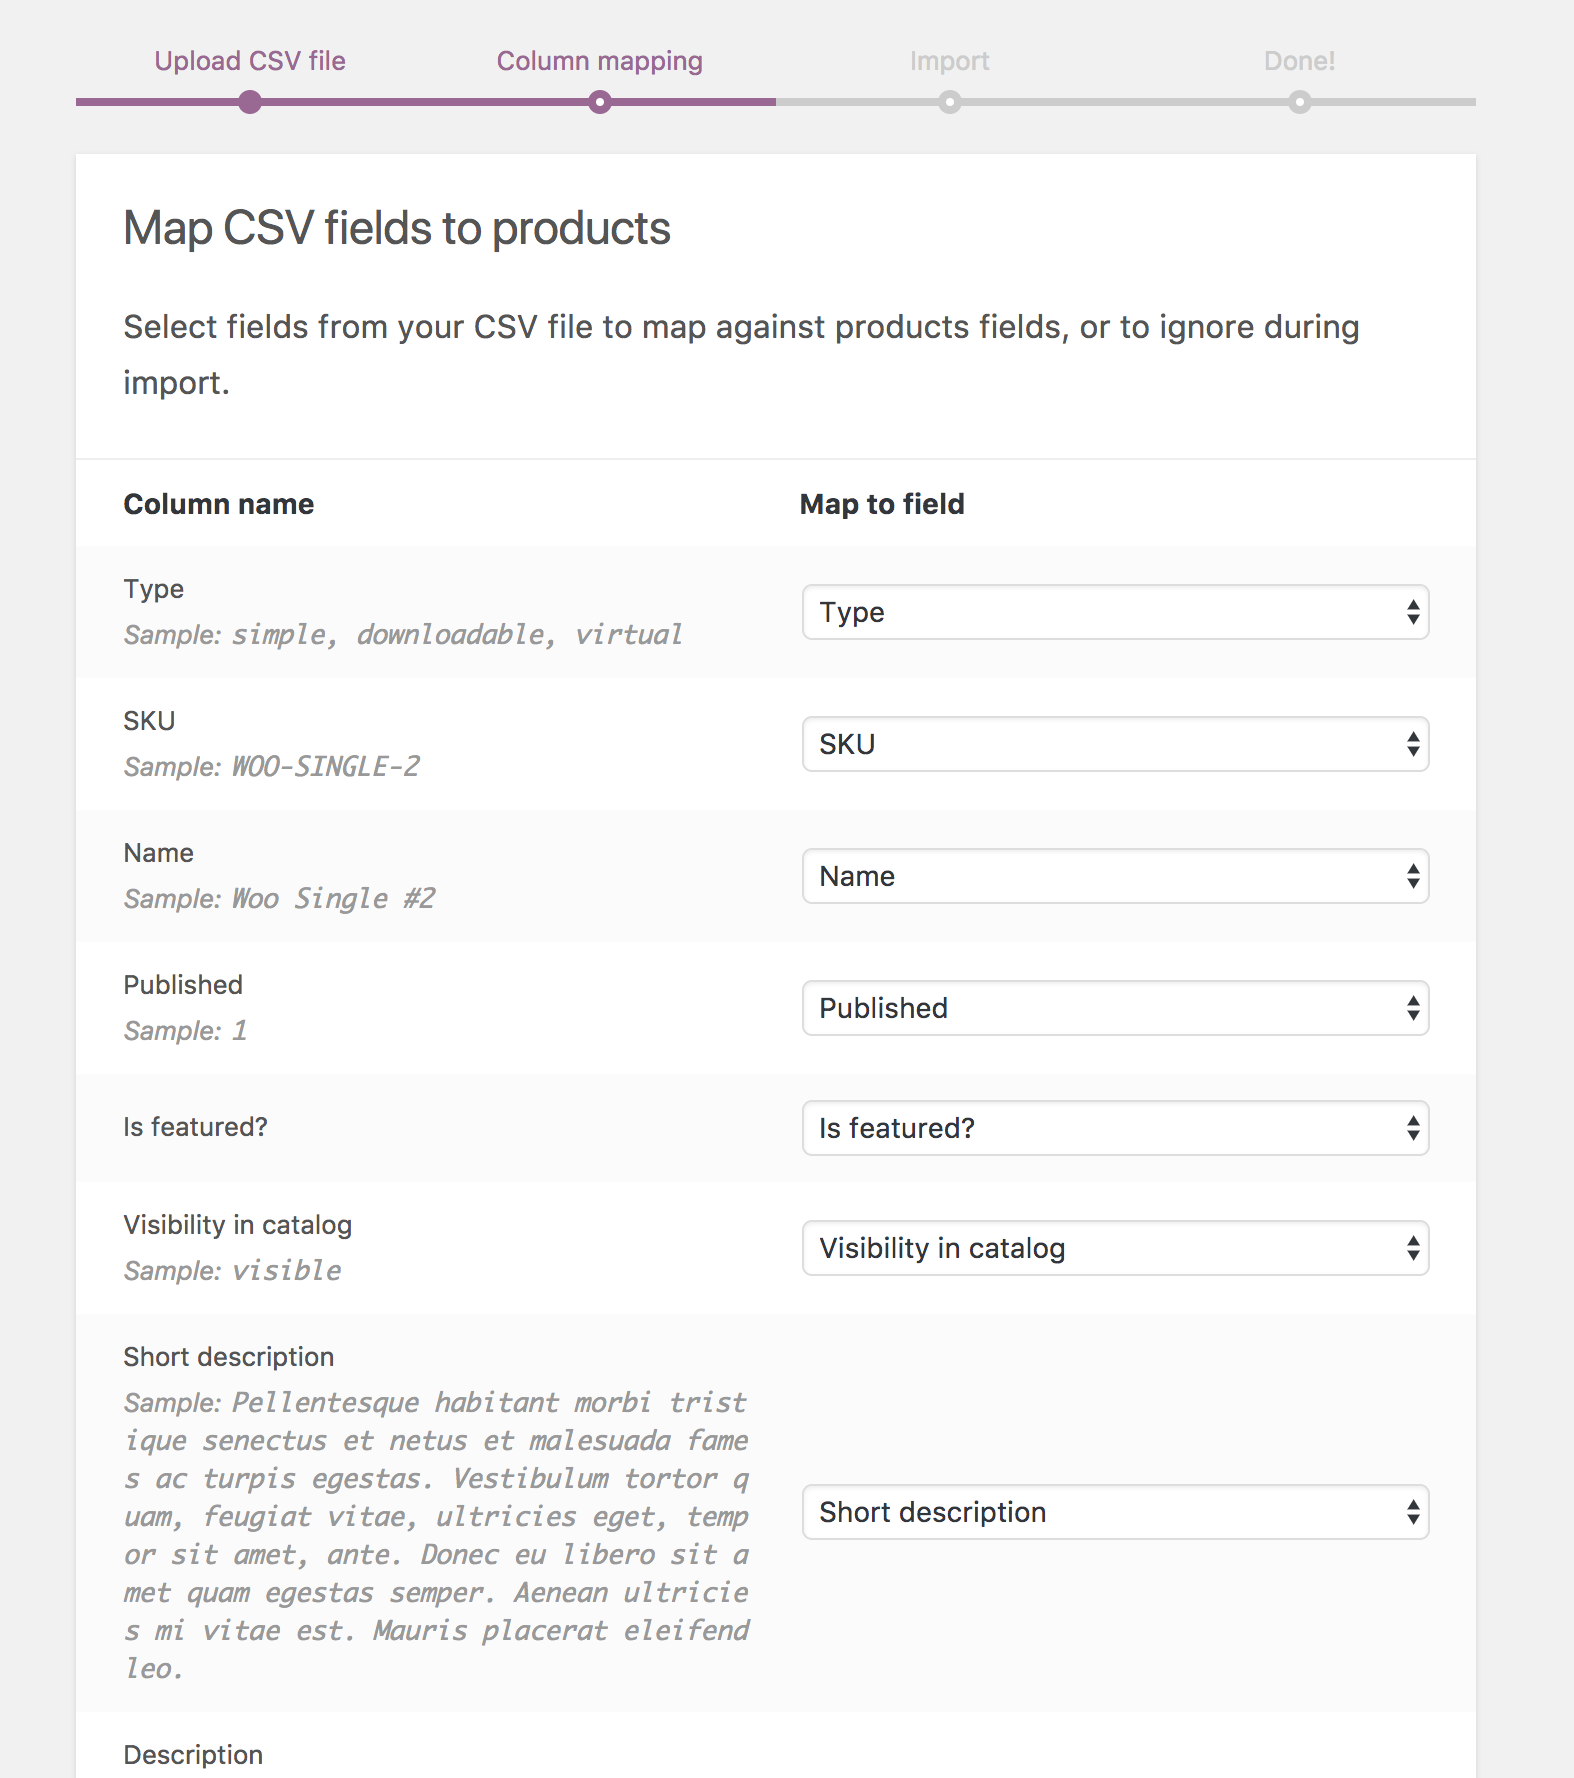 This image shows mapping while uploading products 